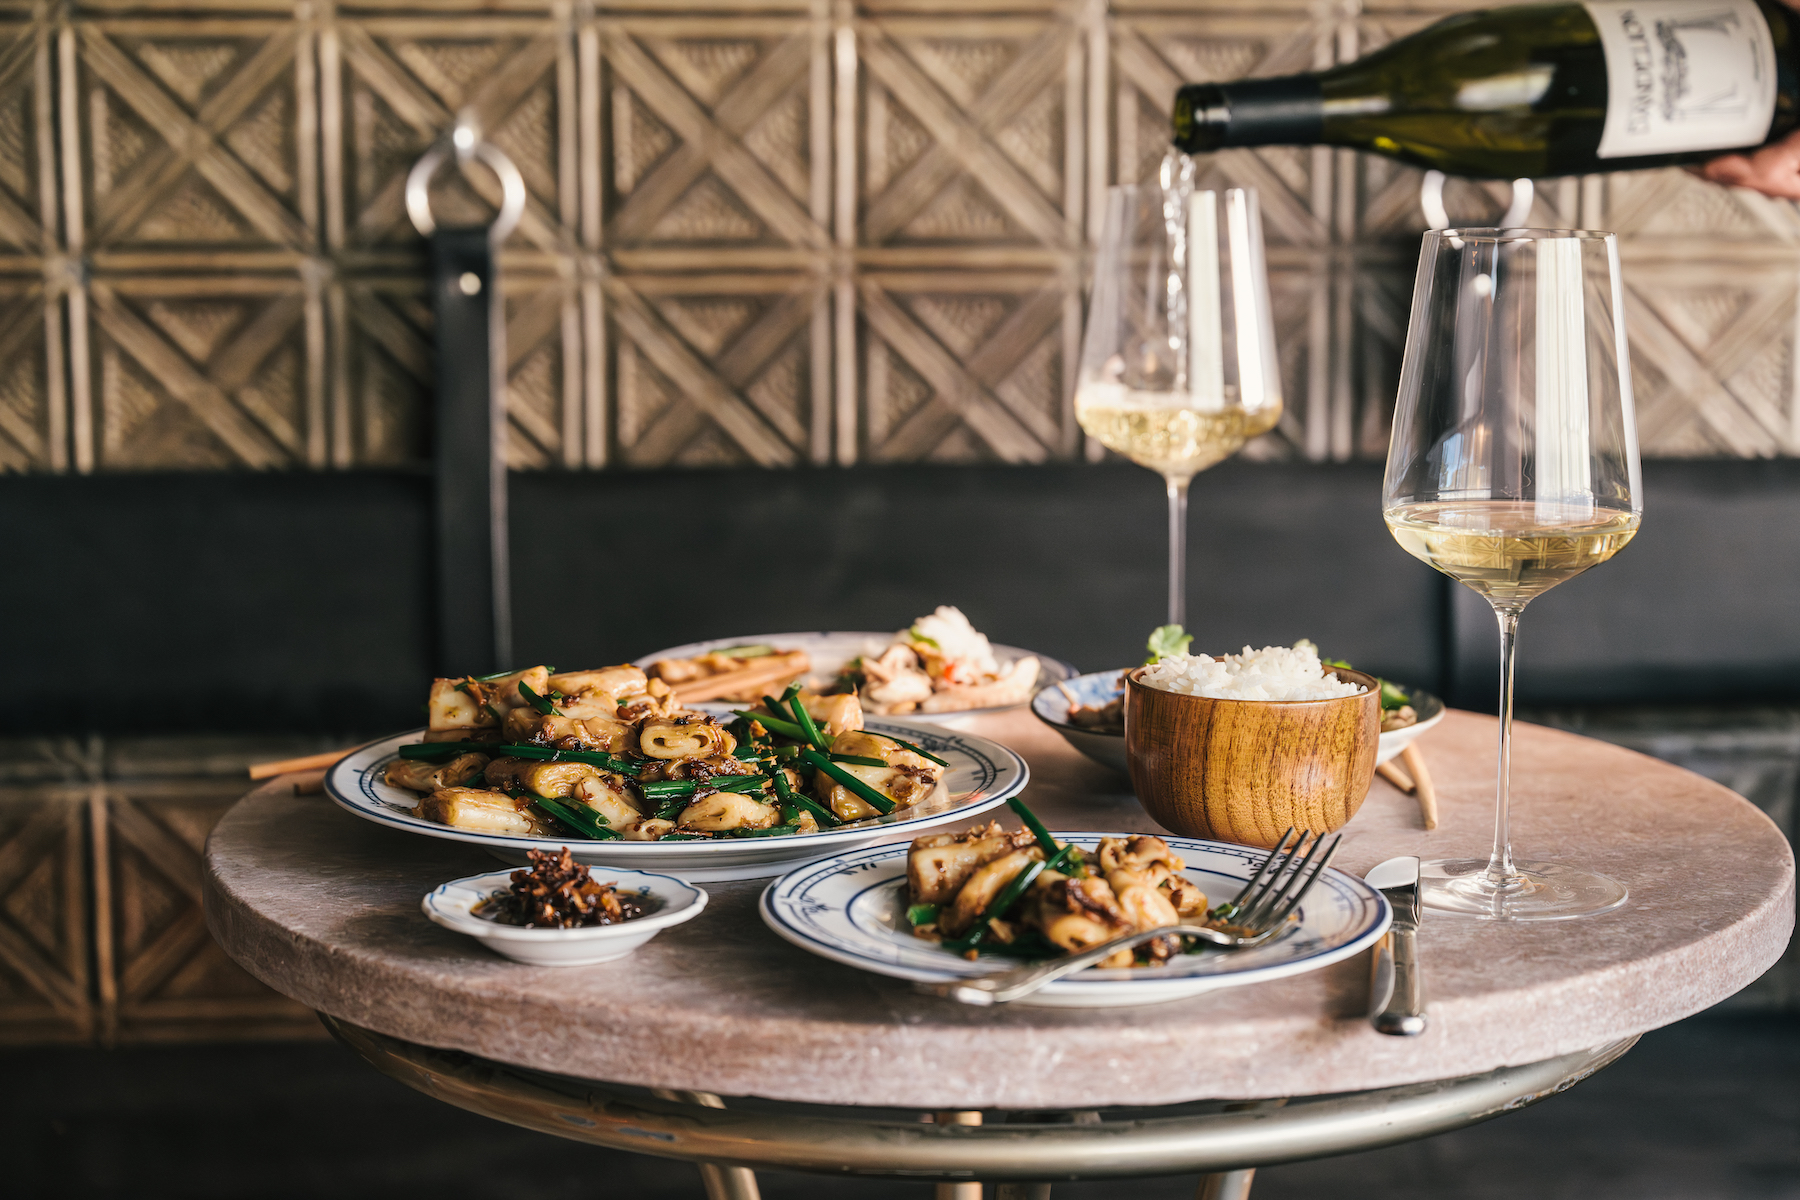 Meet Tolo, Now Serving Personal Chinese Food With Stellar Wines